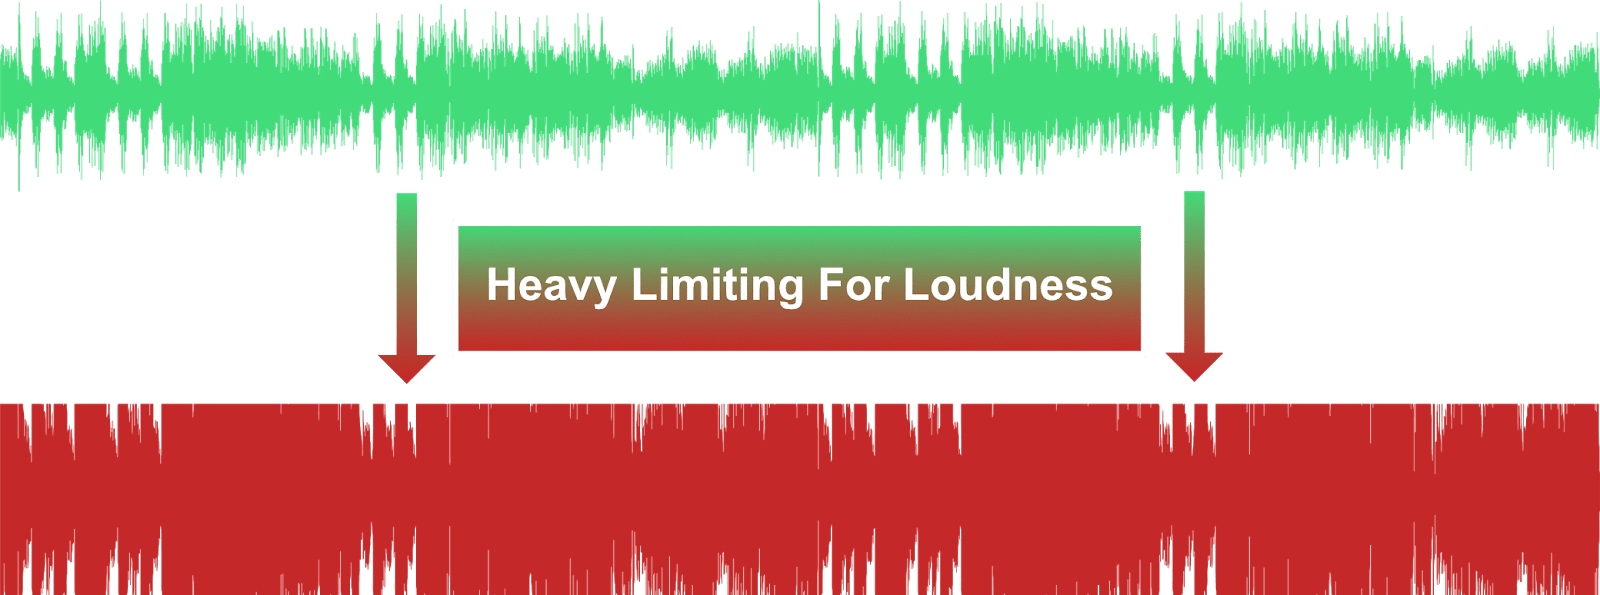 heavy-limiting-for-loudness.png